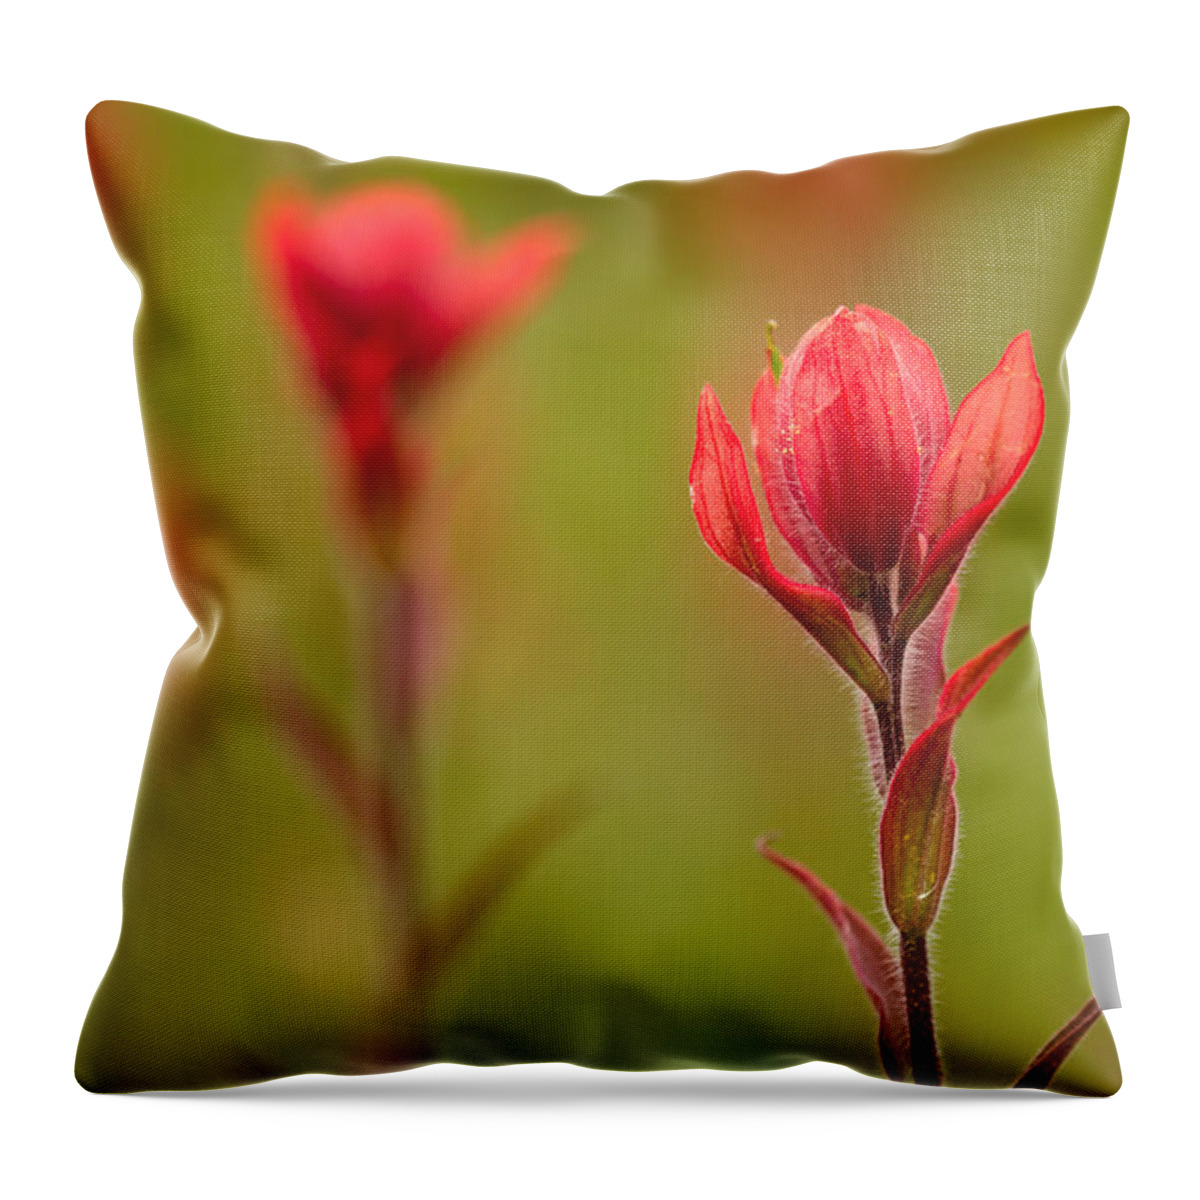 Castilleja Rhexifolia Throw Pillow featuring the photograph Rosy Indian Paintbrush by Teri Virbickis